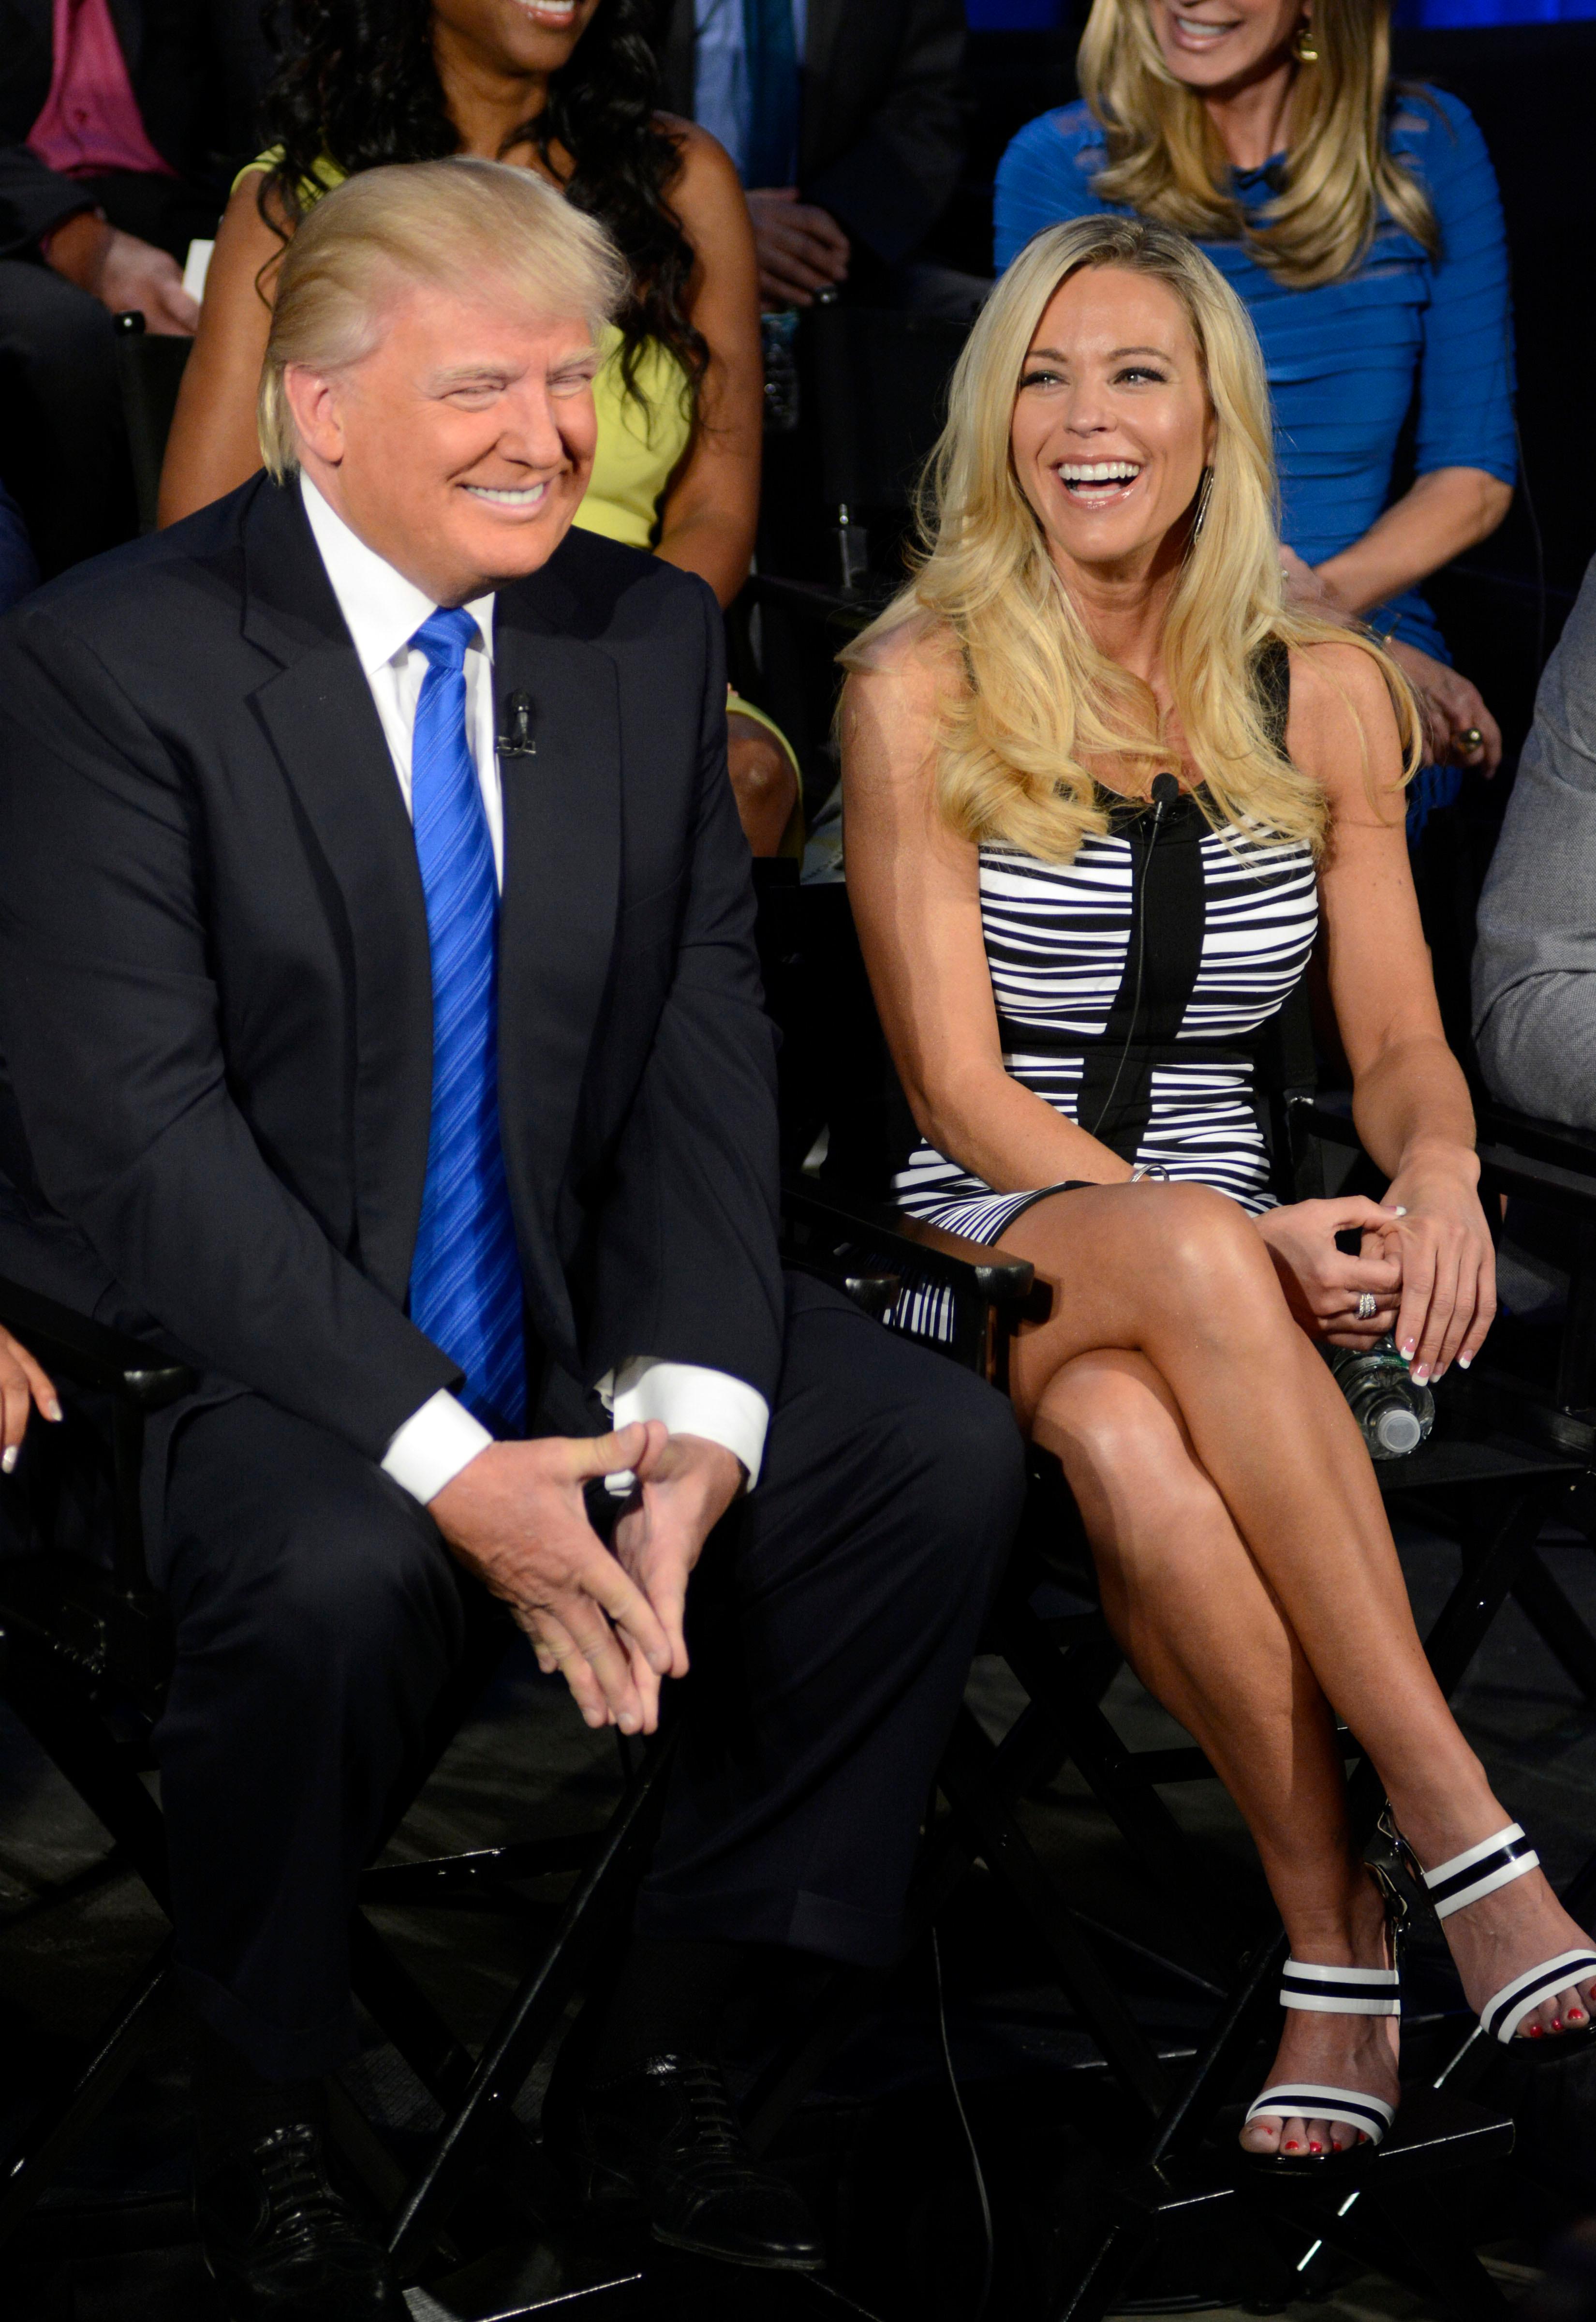 &#039;The Celebrity Apprentice&#039; new cast released and announced at Studio 59, Chelsea Piers, NYC (Set 1)